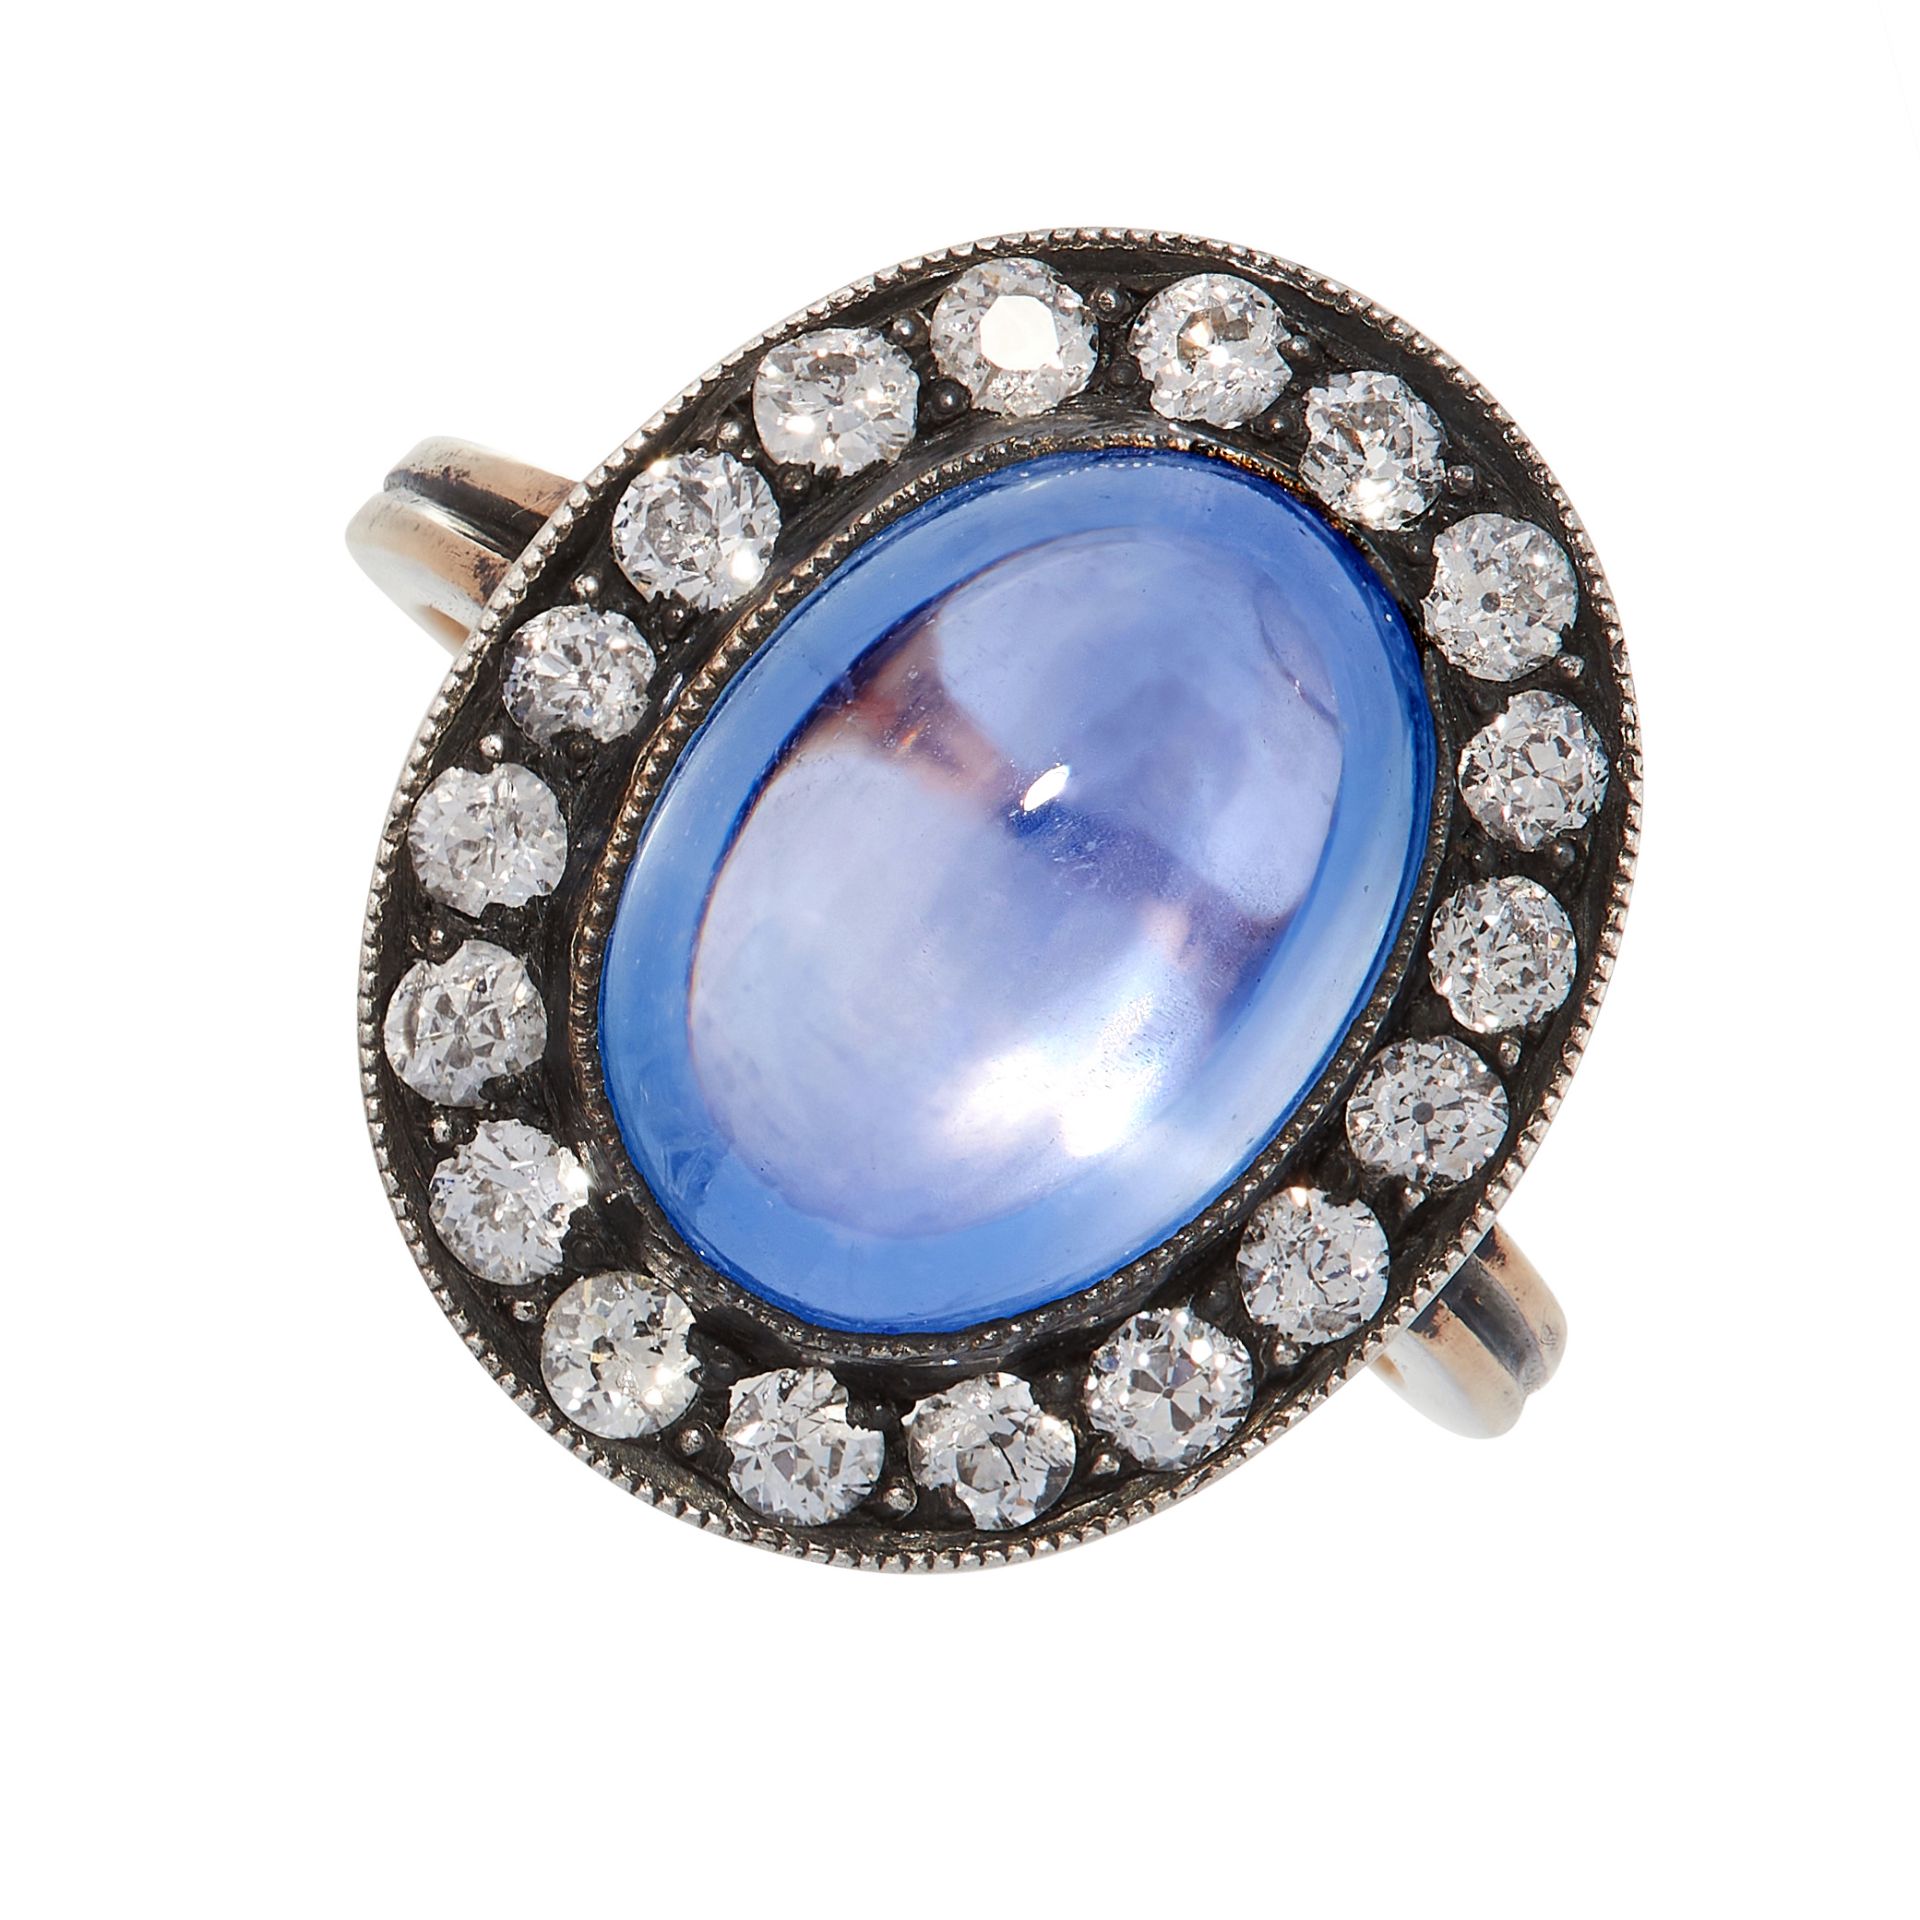 A CEYLON NO HEAT SAPPHIRE AND DIAMOND RING in yellow gold and silver, set with an oval cabochon blue